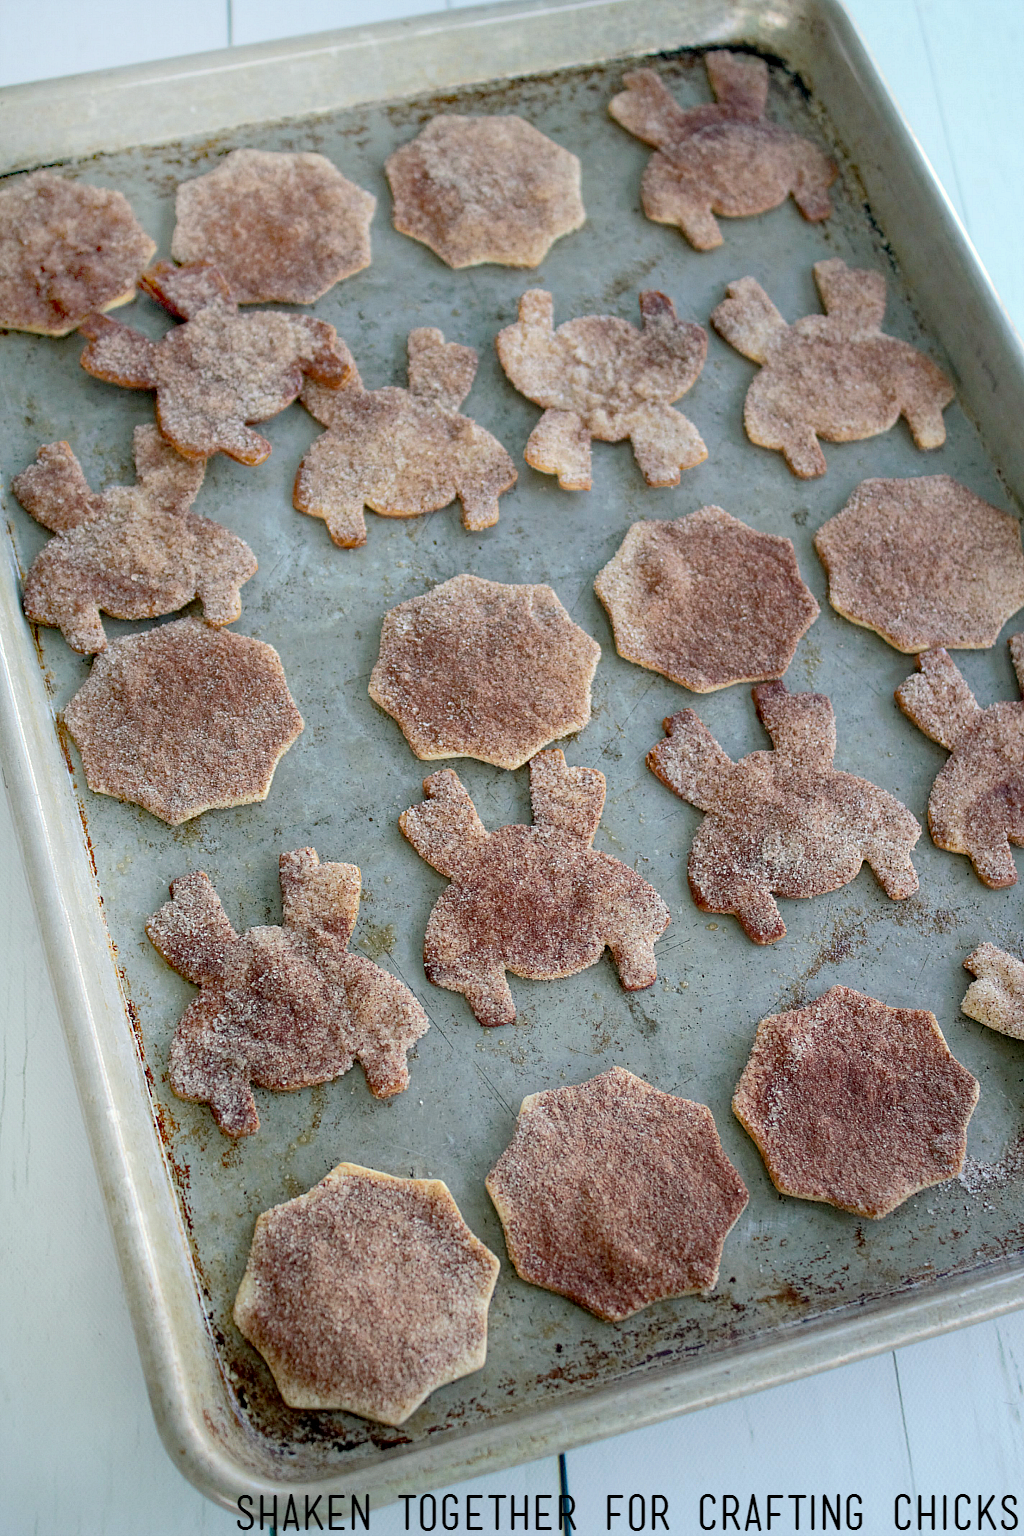 Cinnamon Sugar Spider Chips - The Crafting Chicks